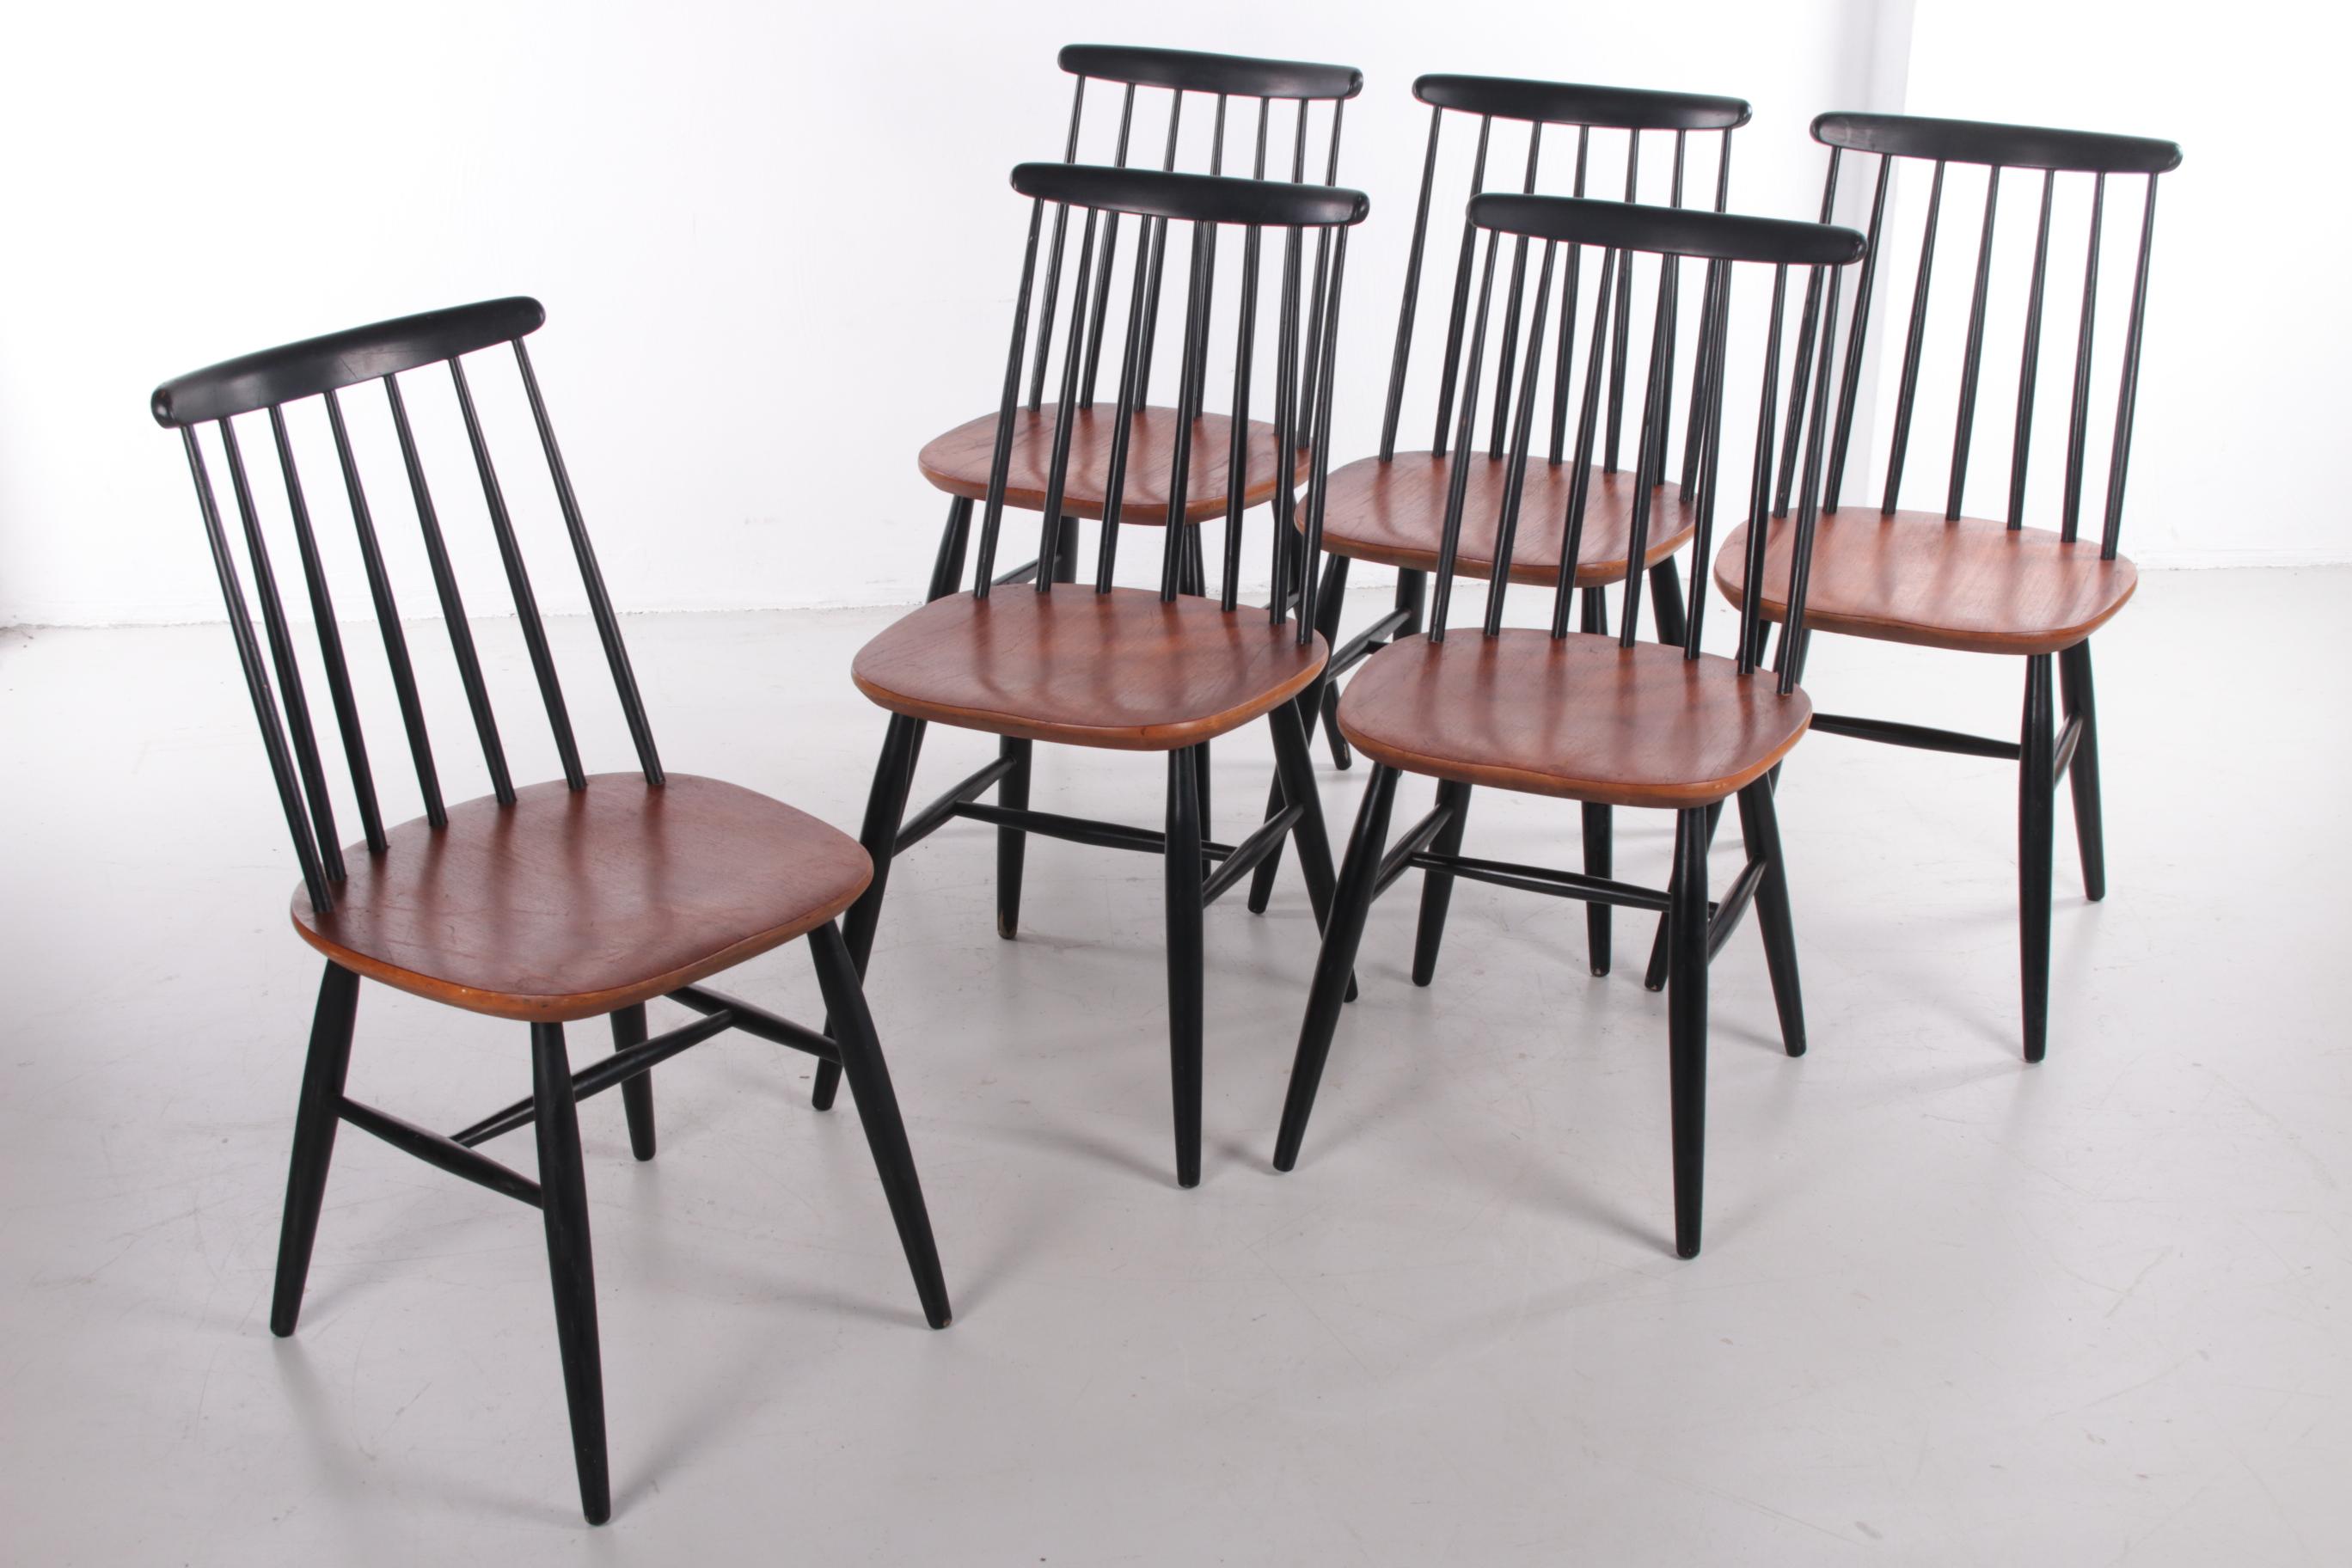 Elegant set of wooden chairs model Fanett by Ilmari Tapiovaara.

The legs and backrest are painted black, which is also part of this model.

All chairs are in excellent condition with minor signs of wear appropriate to their age.

Designer